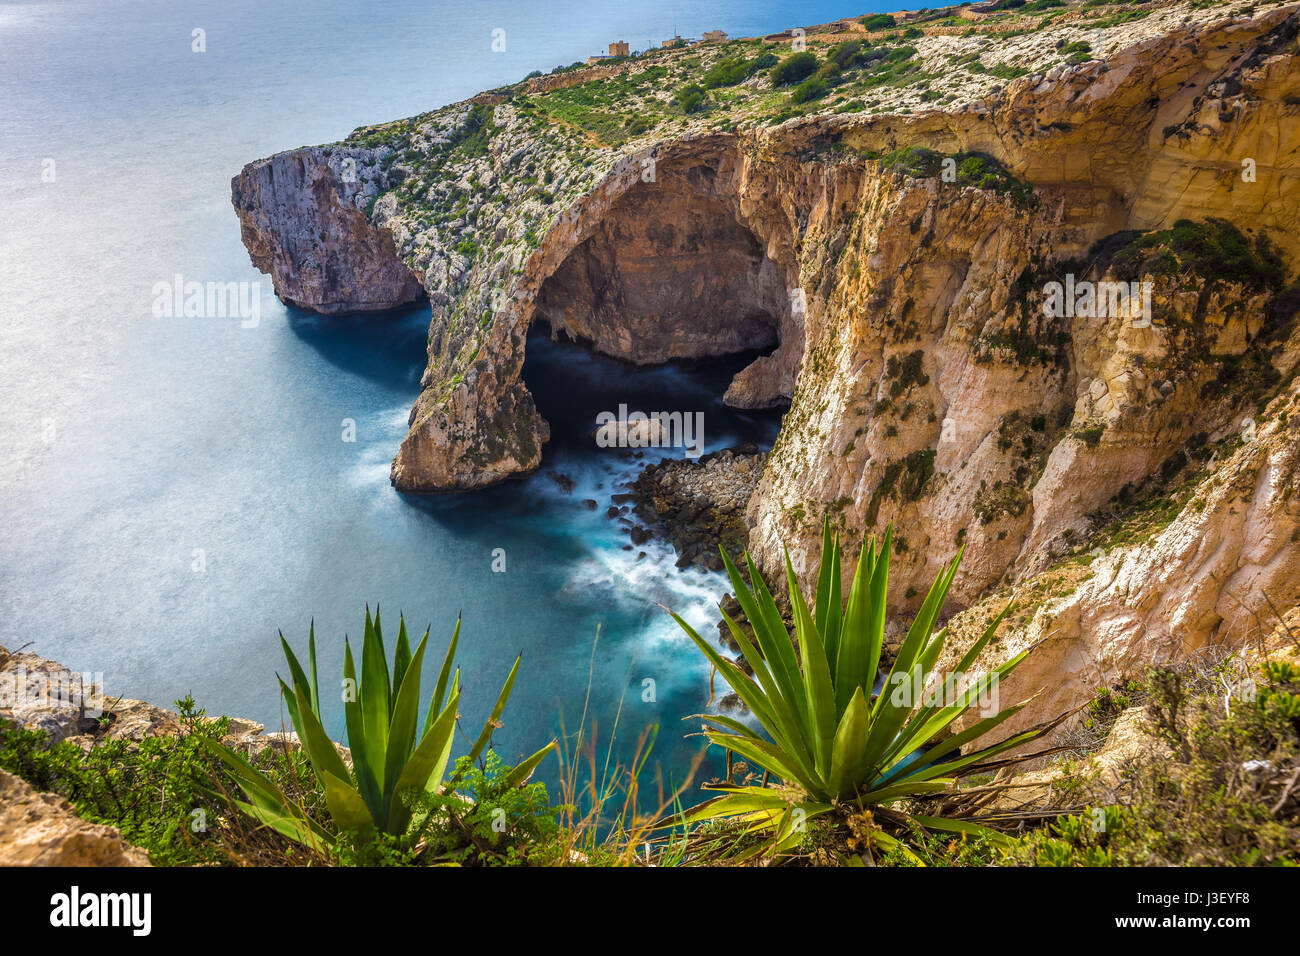 Malta - The famous arch of Blue Grotto cliffs with green leaves Stock Photo